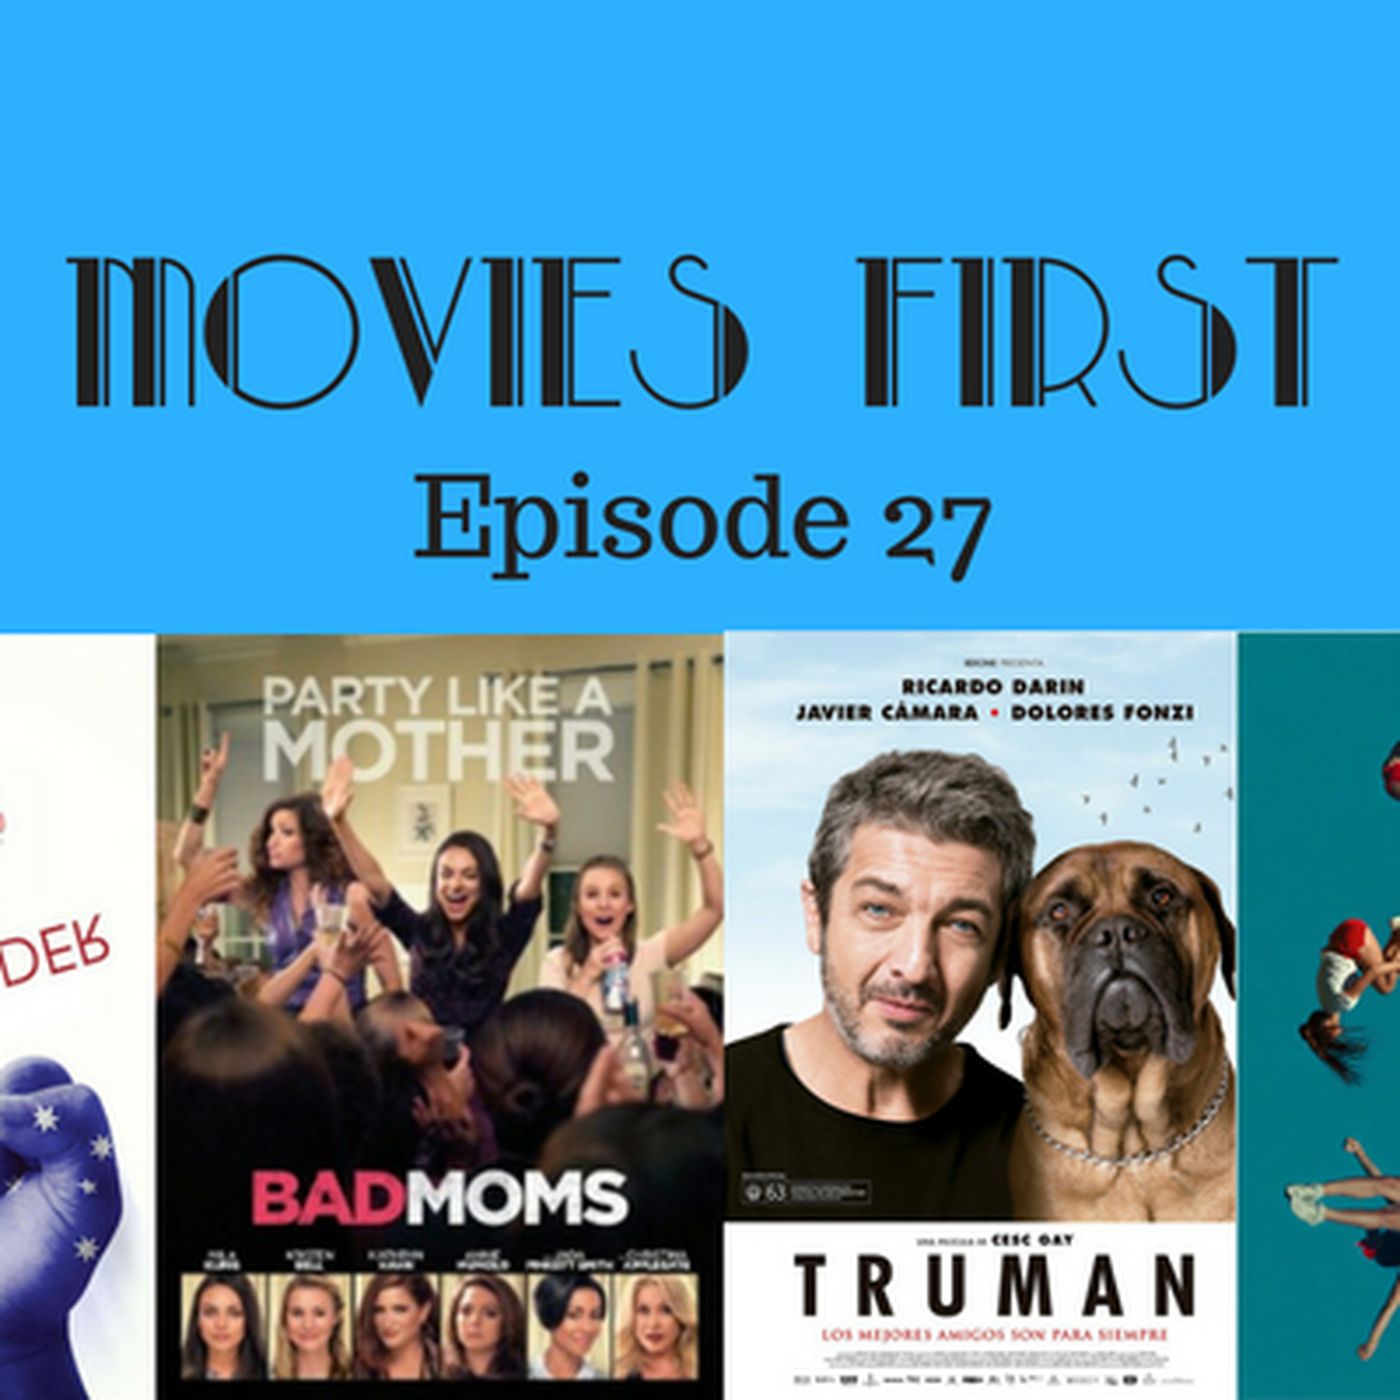 28: Movies First with Alex First and Chris Coleman Episode 27 - The worst movie ever?